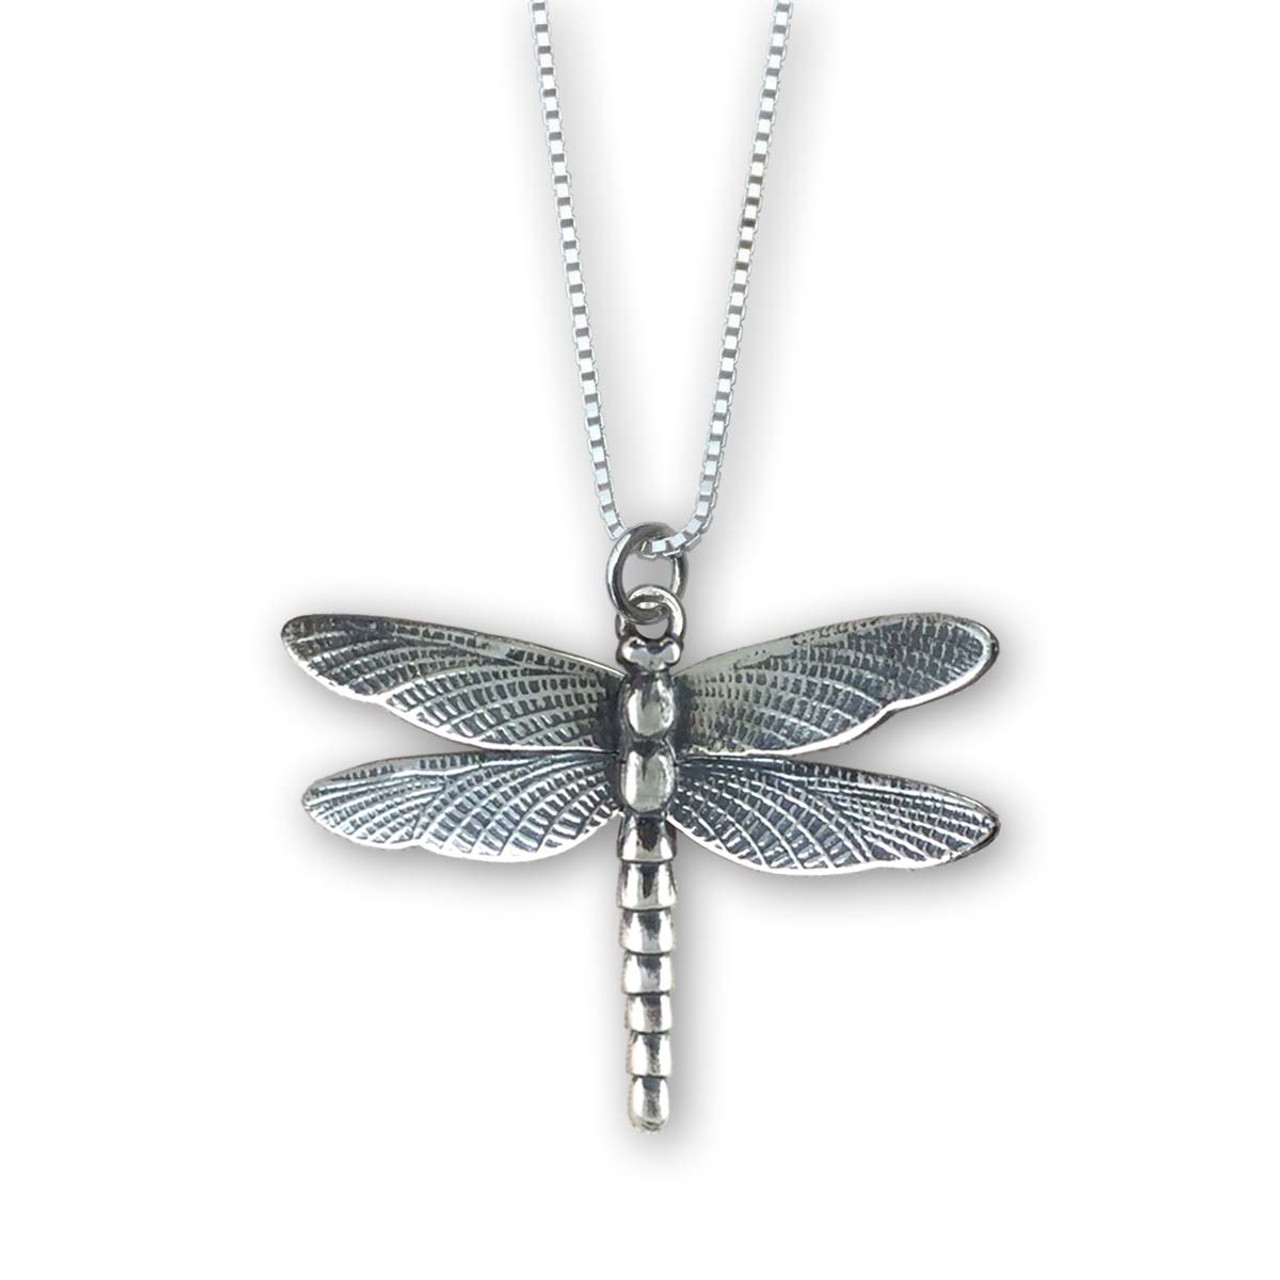 Jewelili Dragonfly Pendant Necklace with Treated Black and Natural